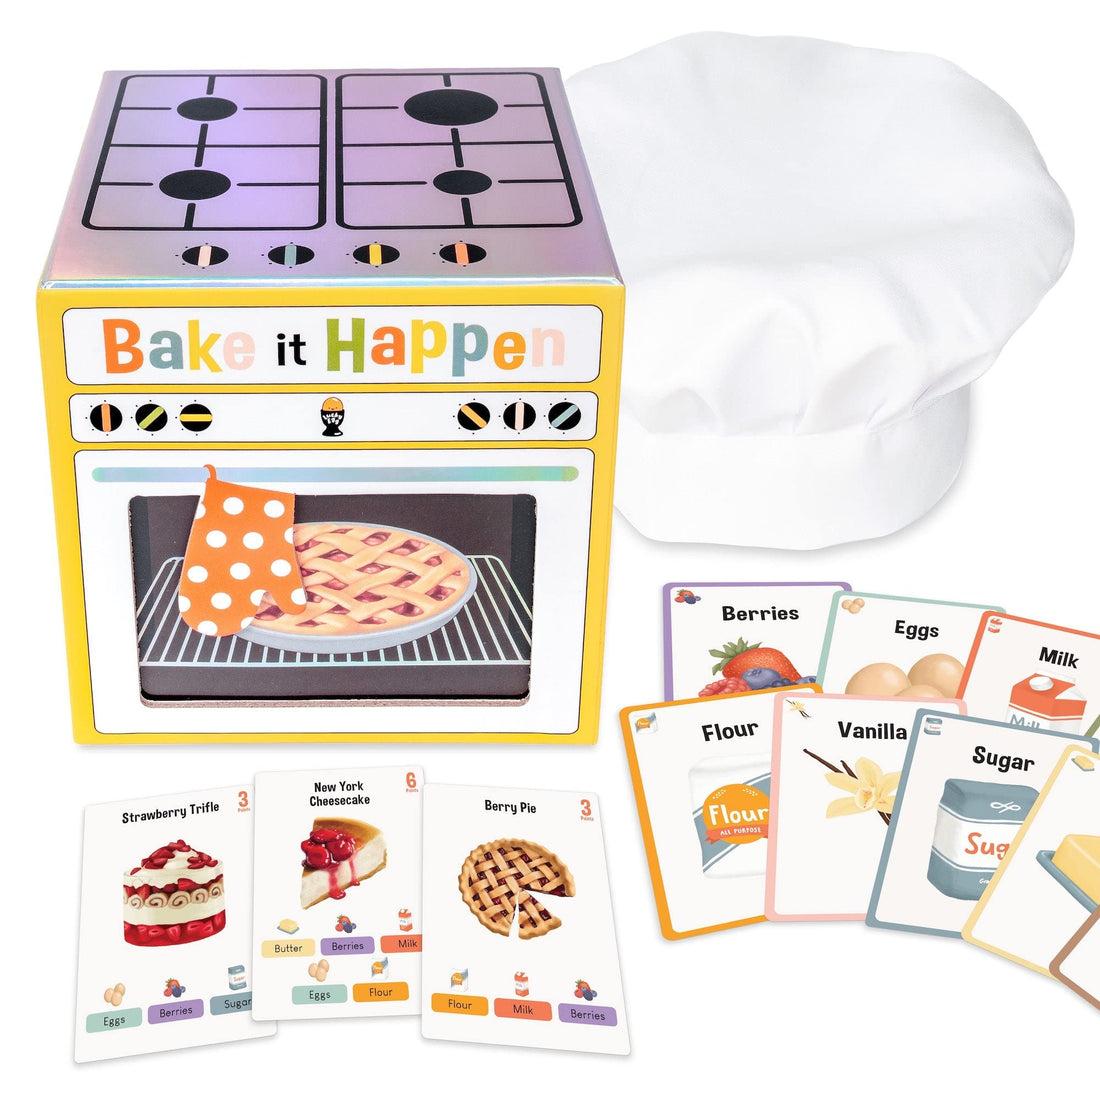 Lucky Egg Bake It Happen: A Deliciously Fun Light Strategy Card Game - Ages 6+, 3-10 Players - Kids Party Board Games, Card Games, Family Games for Kids and Adults, Birthday Present for Kids, Travel